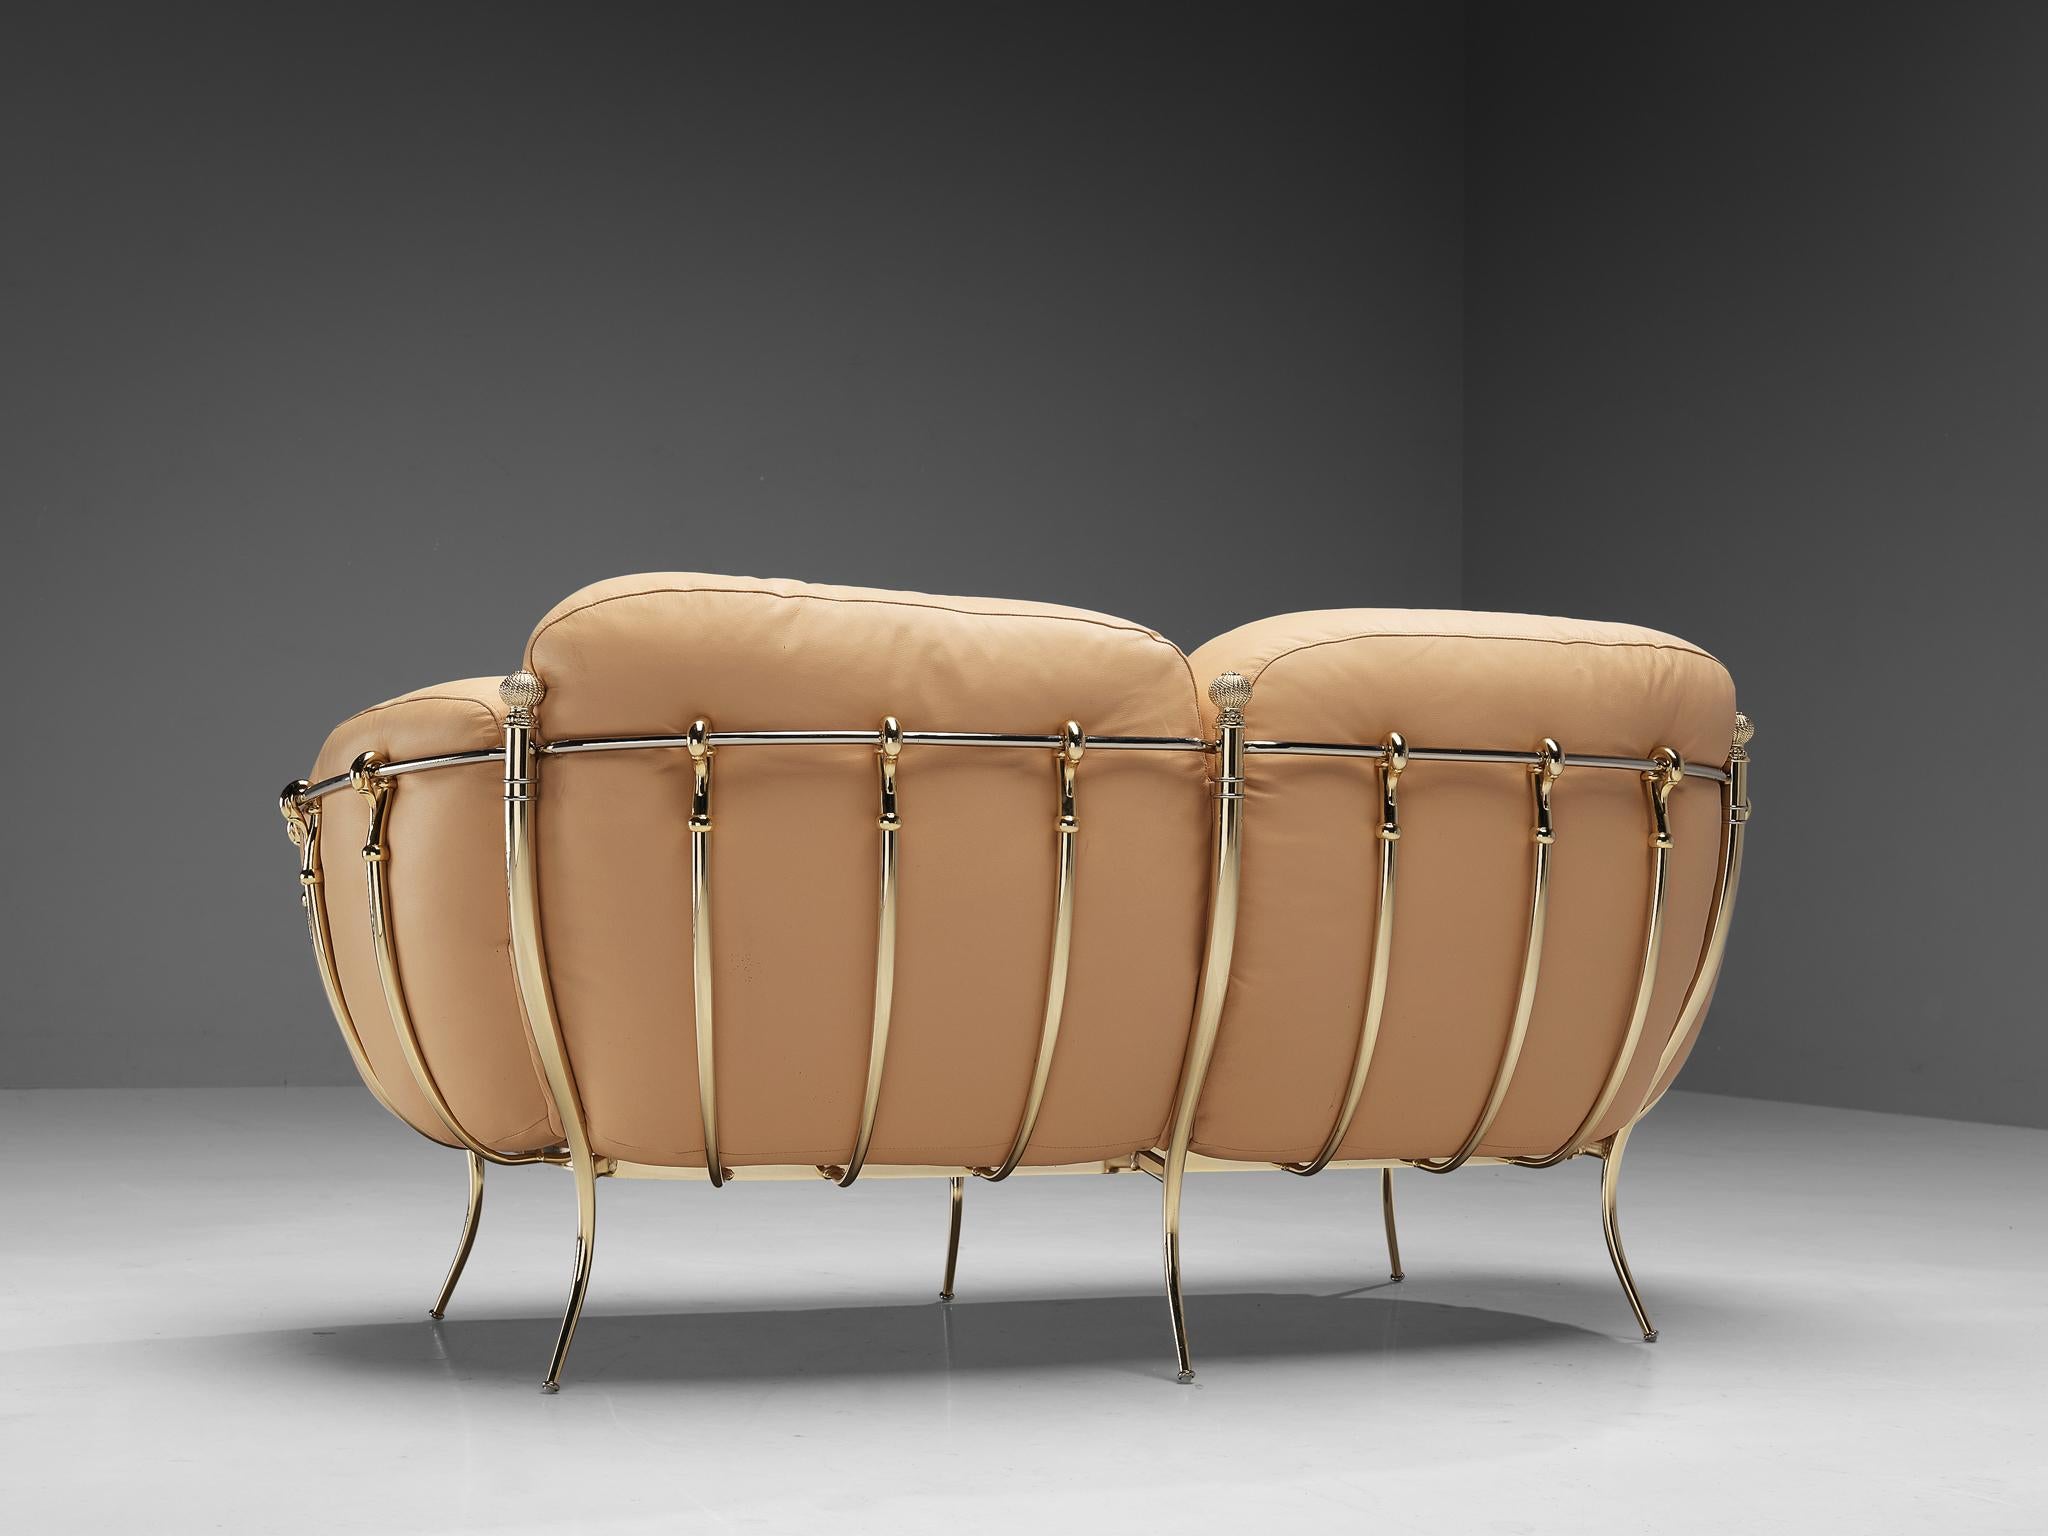 Late 20th Century Spanish Sofa in Peach Leather and Brass For Sale